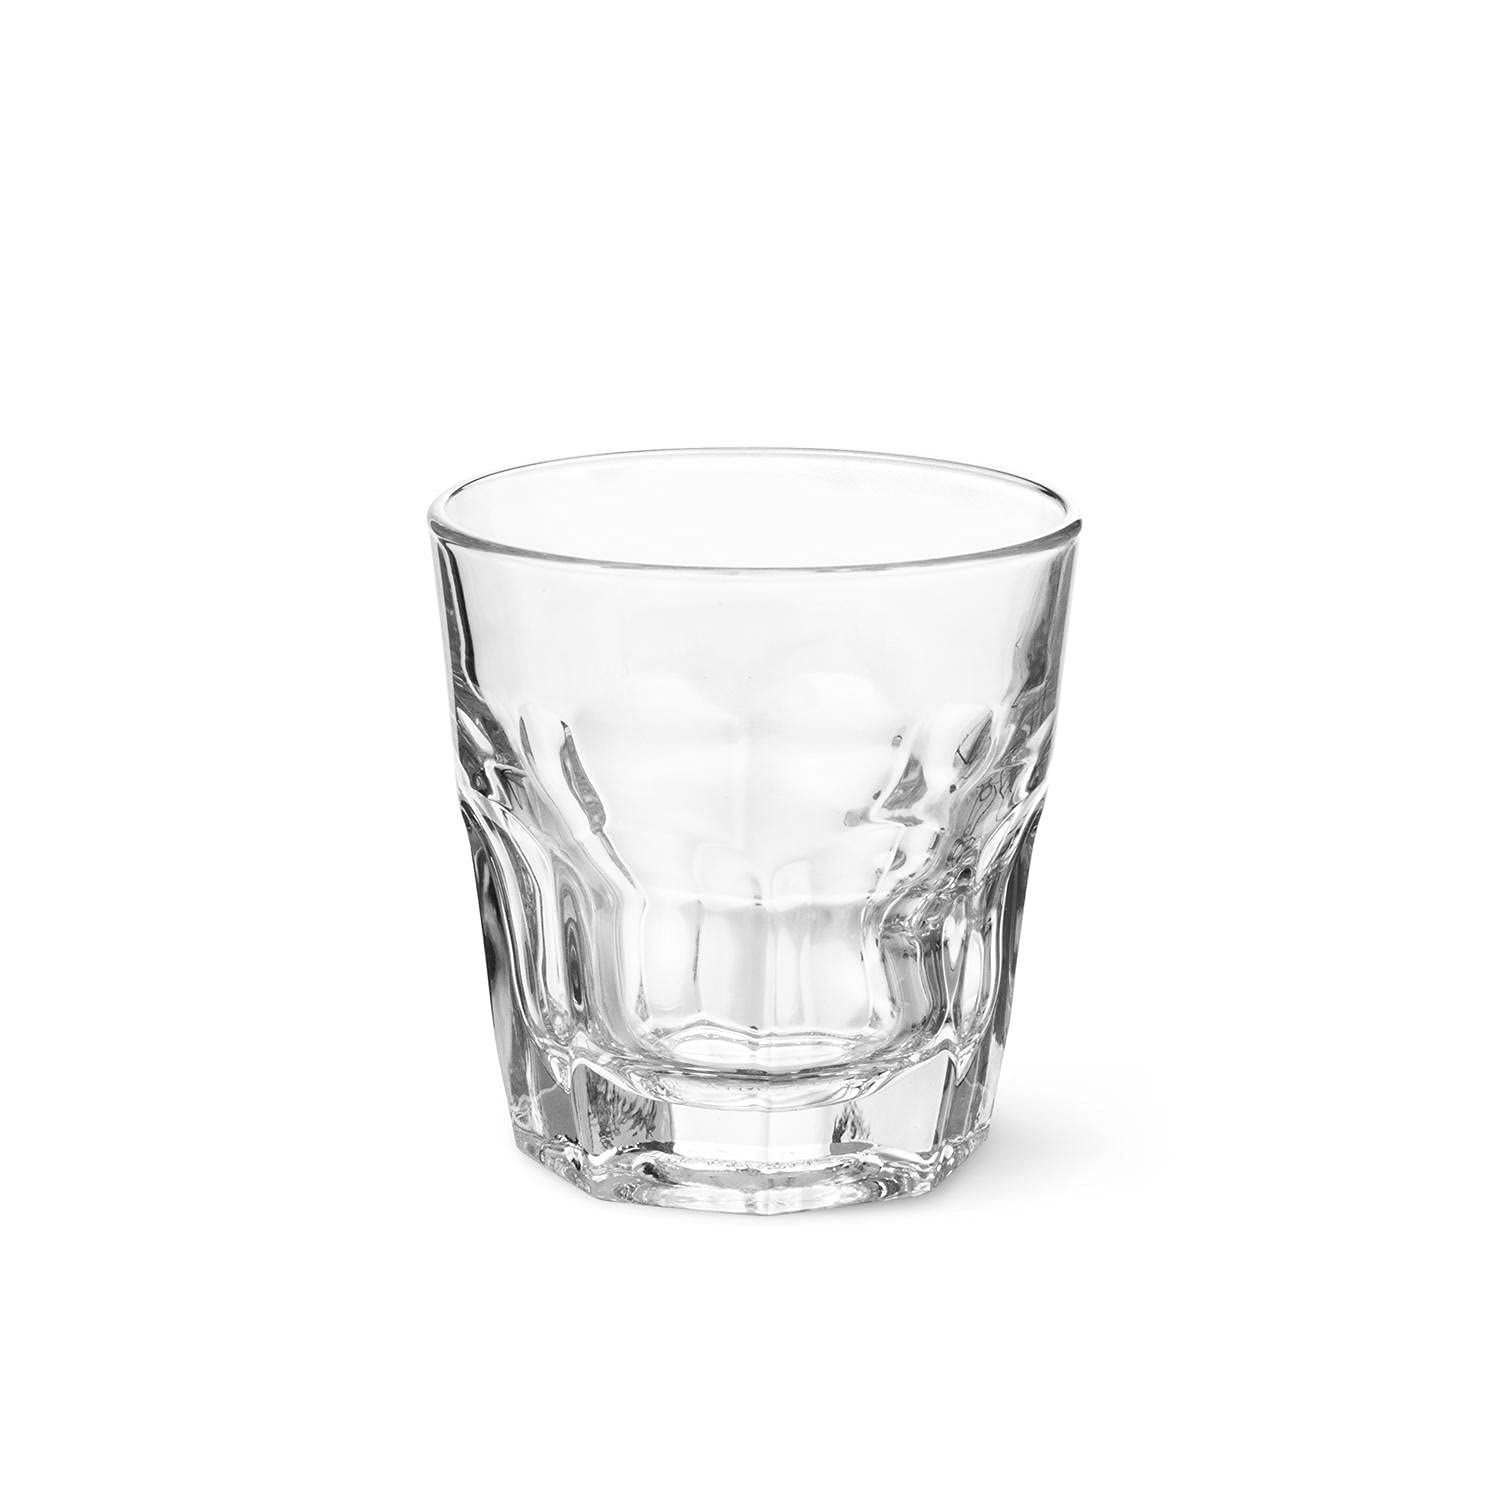 Libbey Glassware 15240 Gibraltar Cooler Glass, Duratuff, 8 oz. (Pack of 36) | Amazon (US)